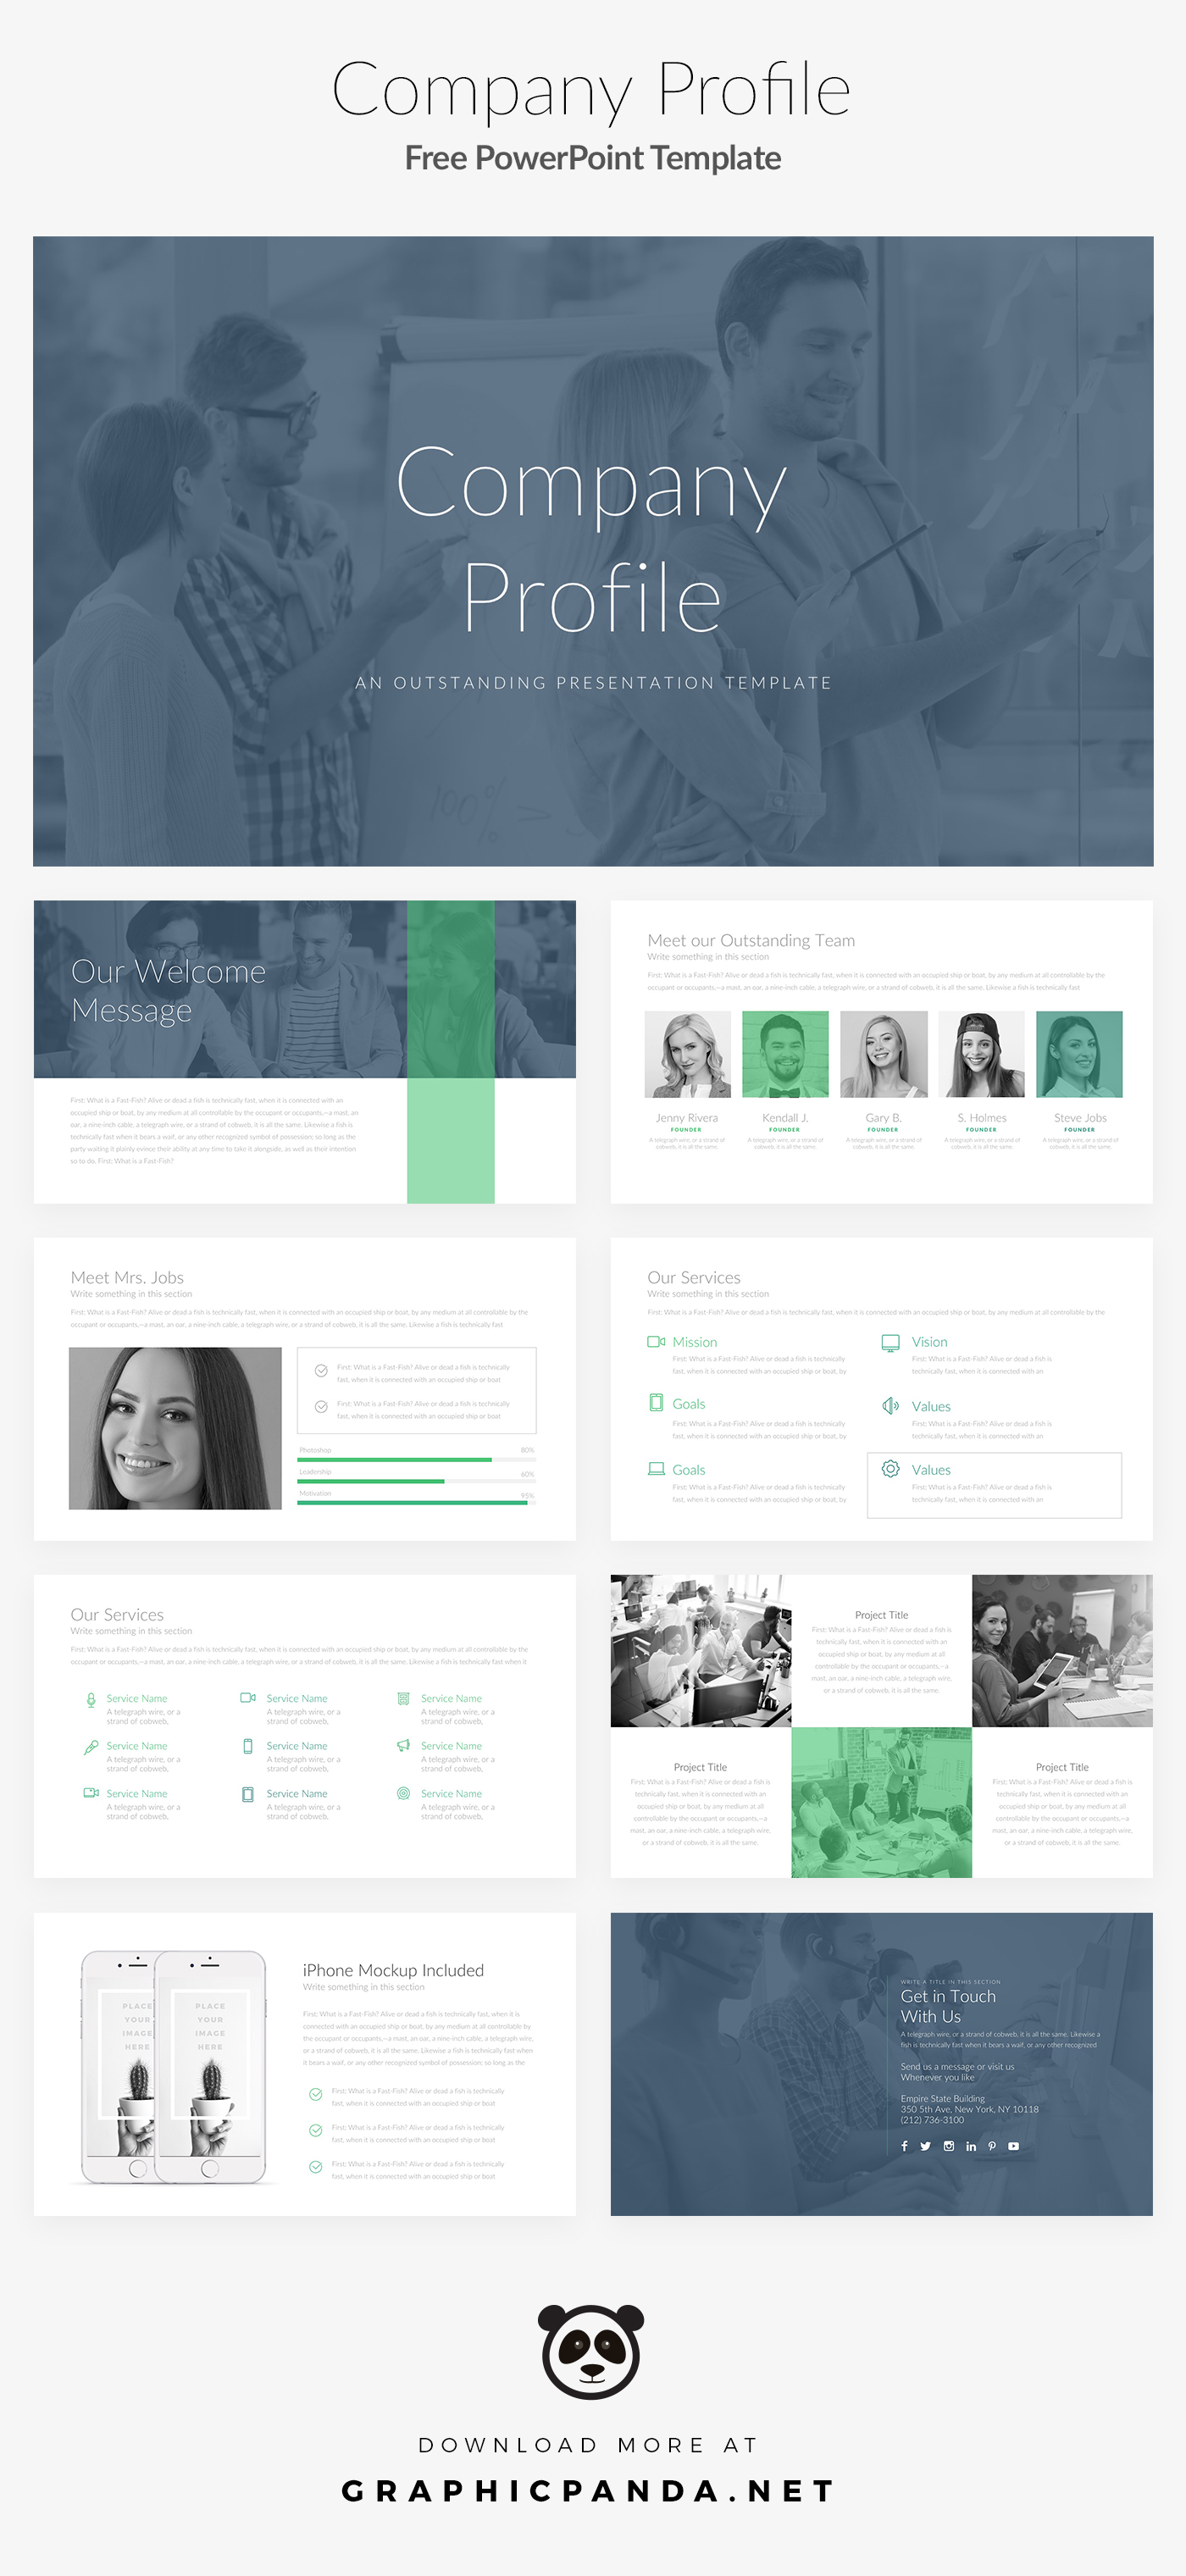 FREE POWERPOINT TEMPLATE COMPANY PROFILE PITCH DECK on